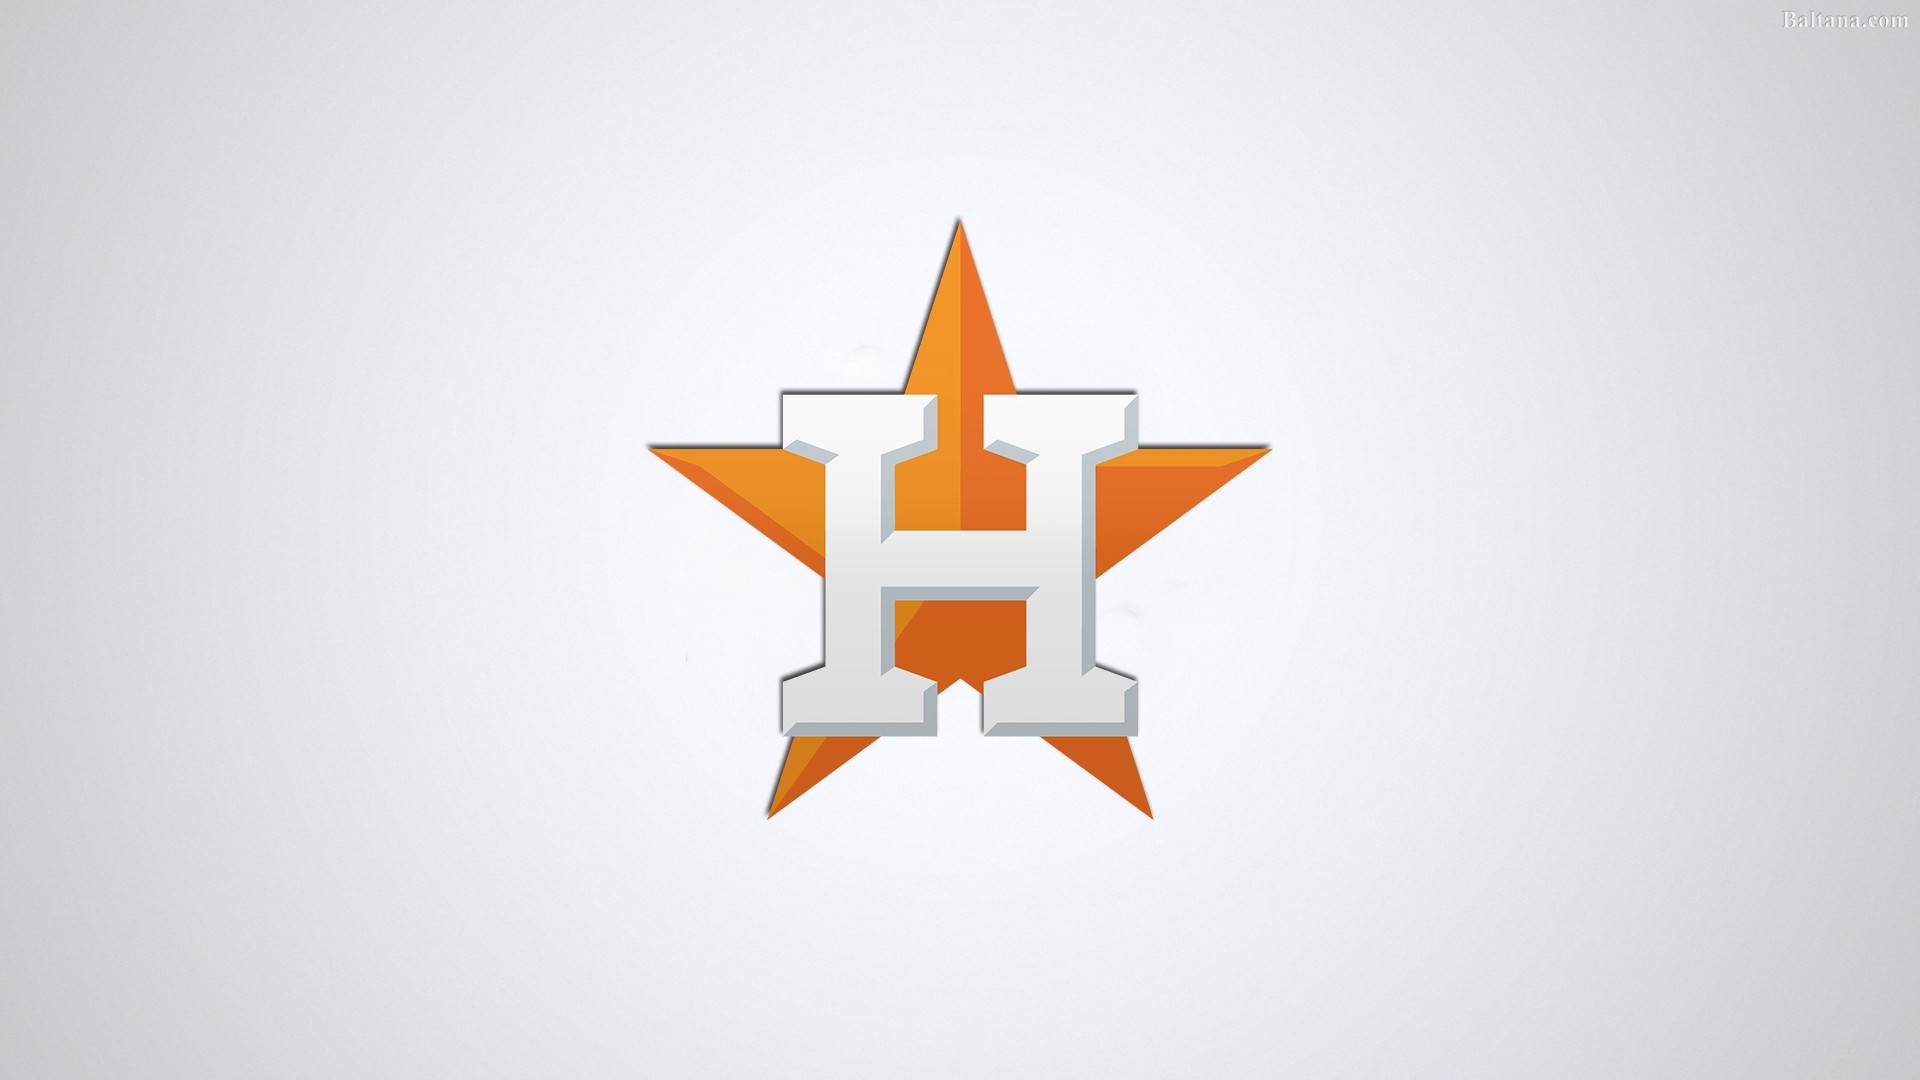 Houston Astros Logo HD Wallpapers with high-resolution 1920x1080 pixel. You can use this wallpaper for Mac Desktop Wallpaper, Laptop Screensavers, Android Wallpapers, Tablet or iPhone Home Screen and another mobile phone device